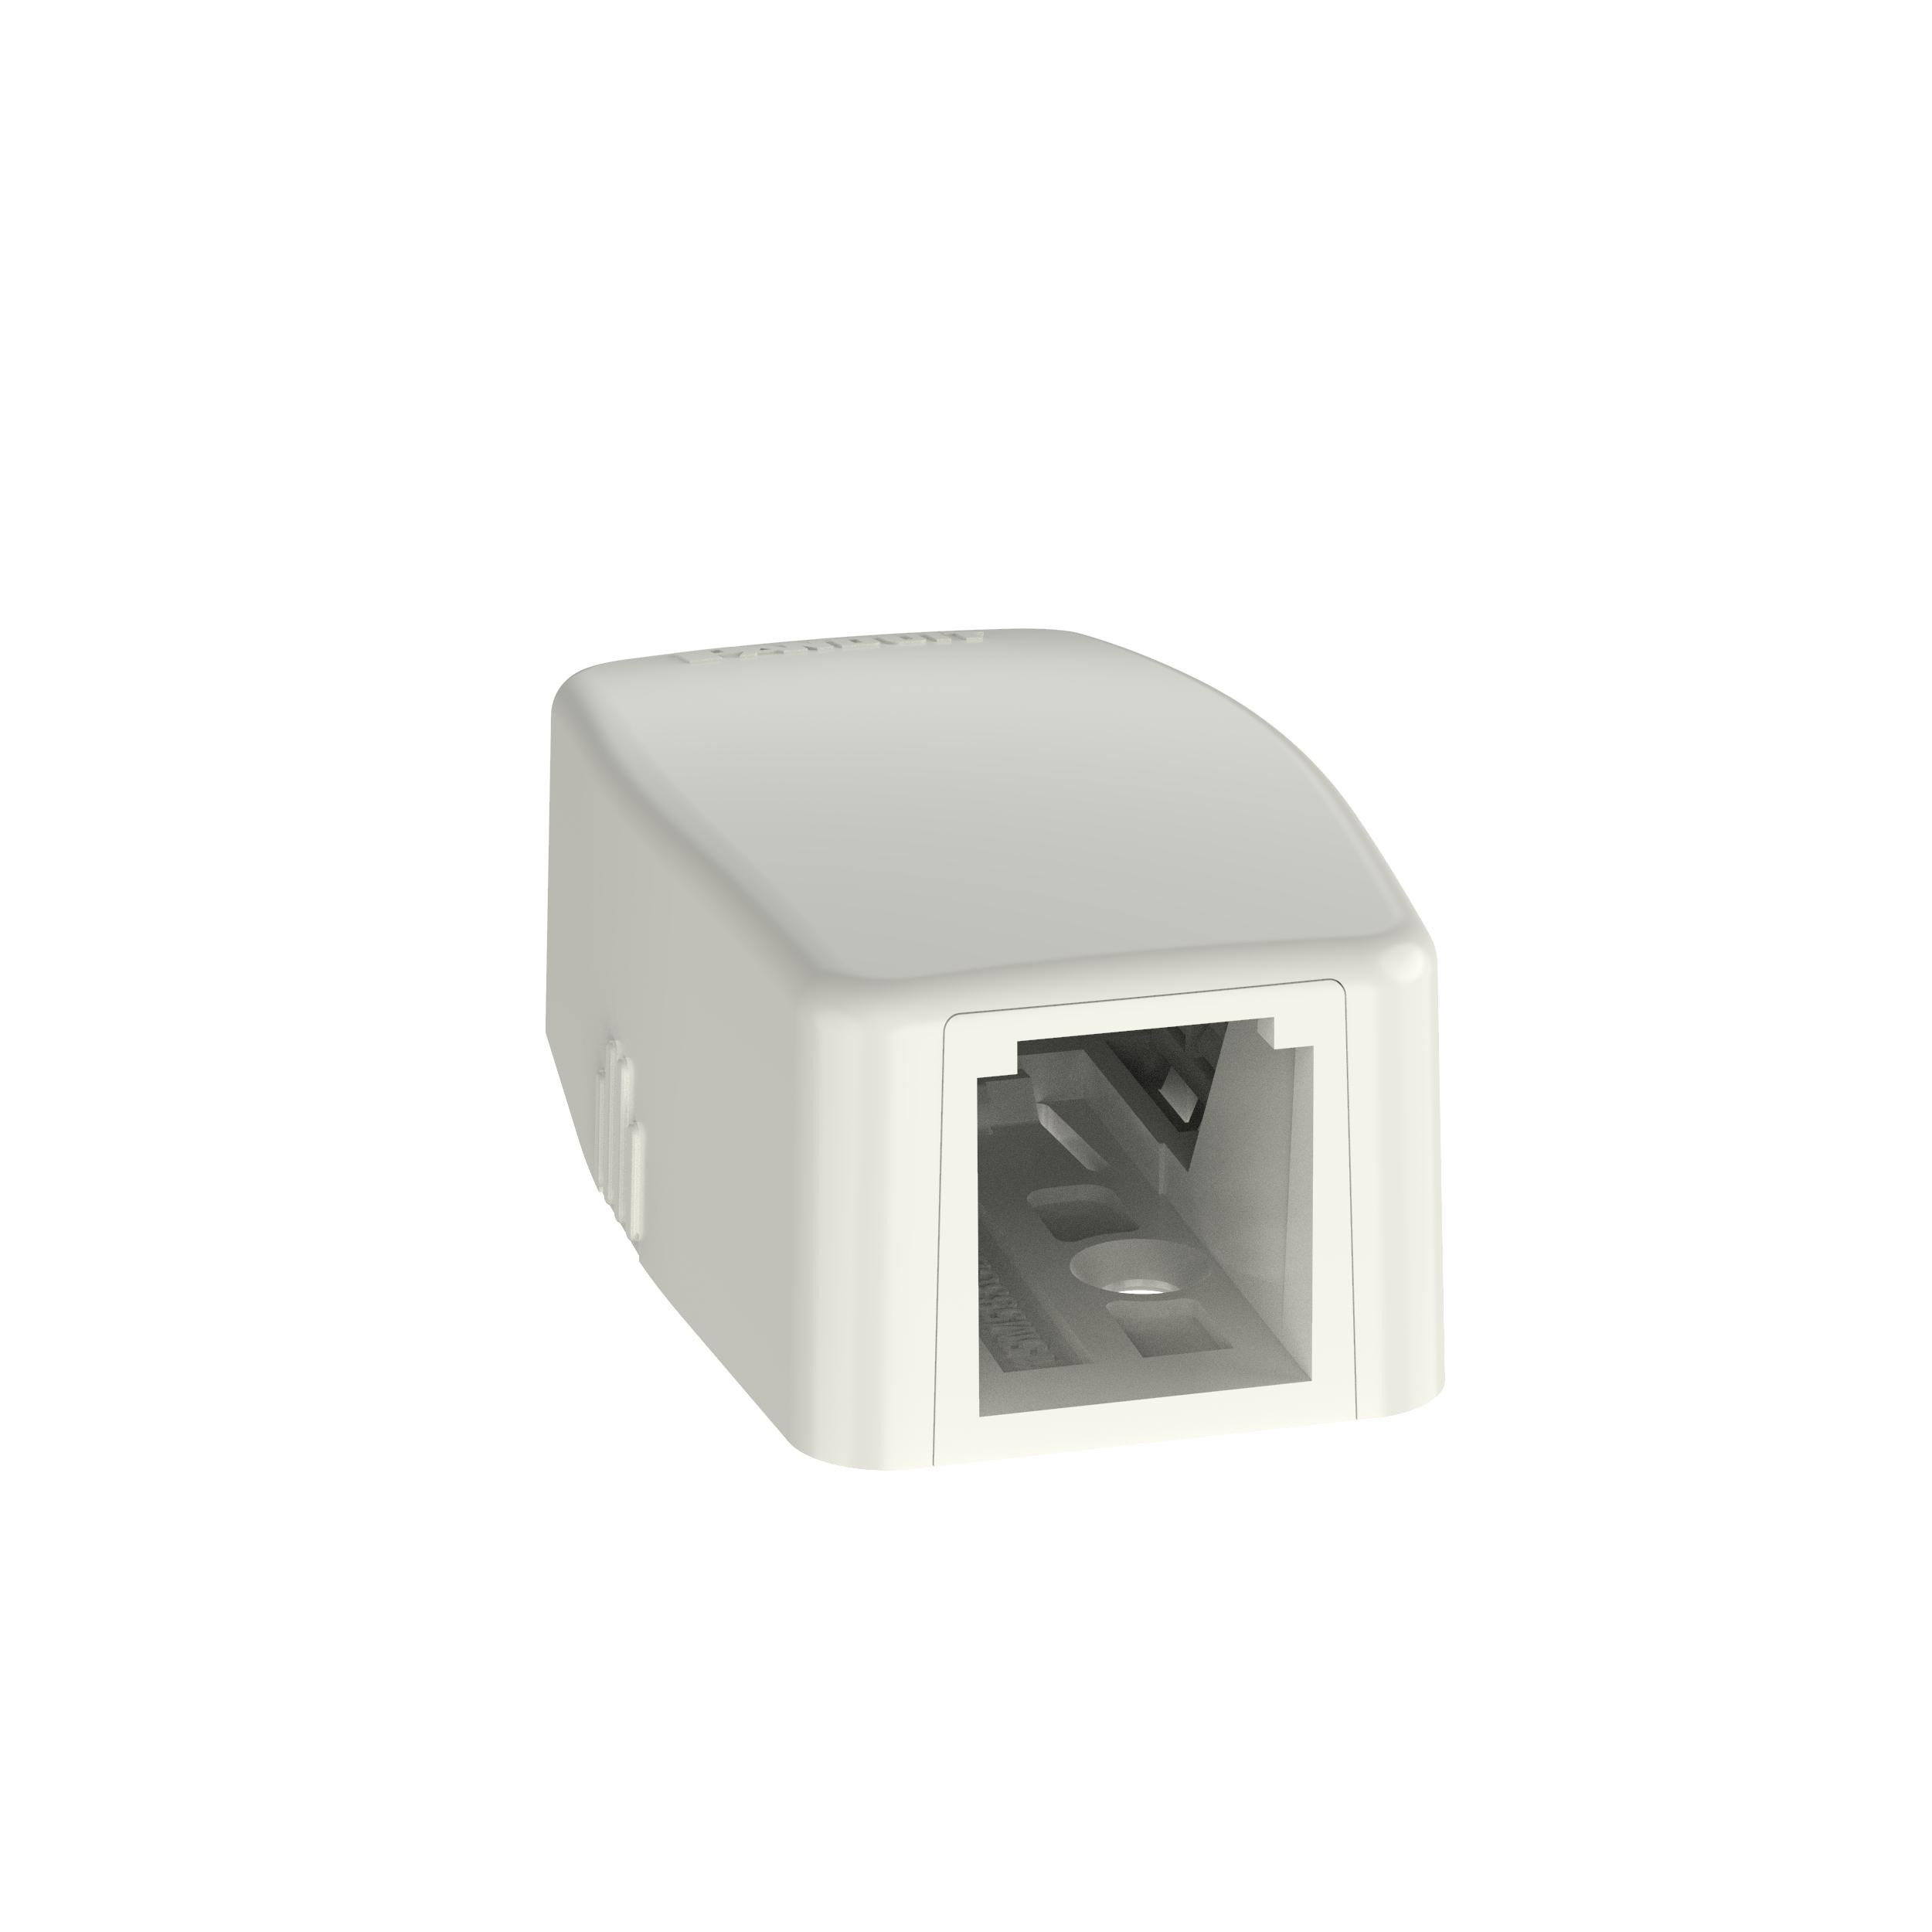 Panduit CBXQ1IW-A SURFACE MNT BOX 1-PORT MINICOMW/ QUICK RELEASE COVER ANDADHESIVE, OFF WHITE